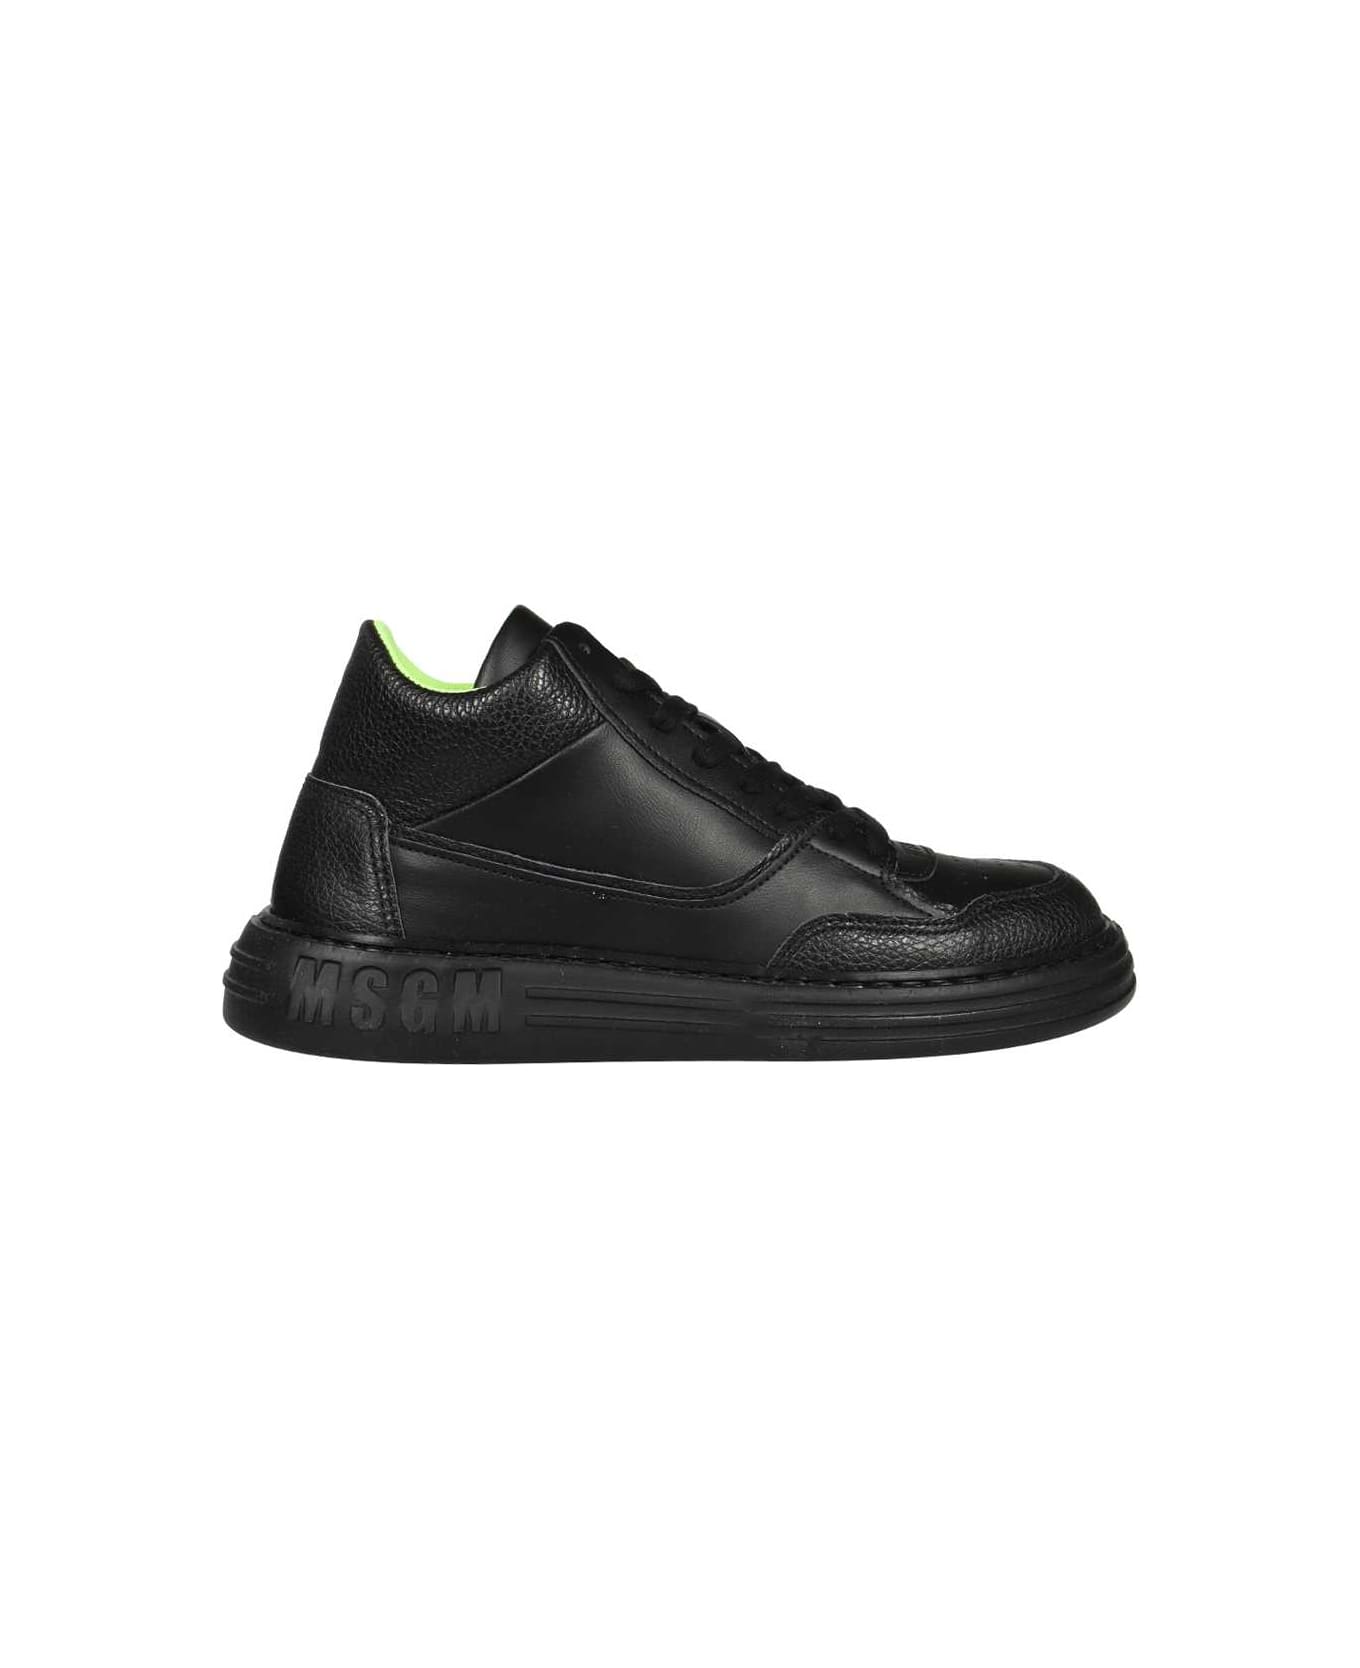 MSGM Leather Low Sneakers - black スニーカー